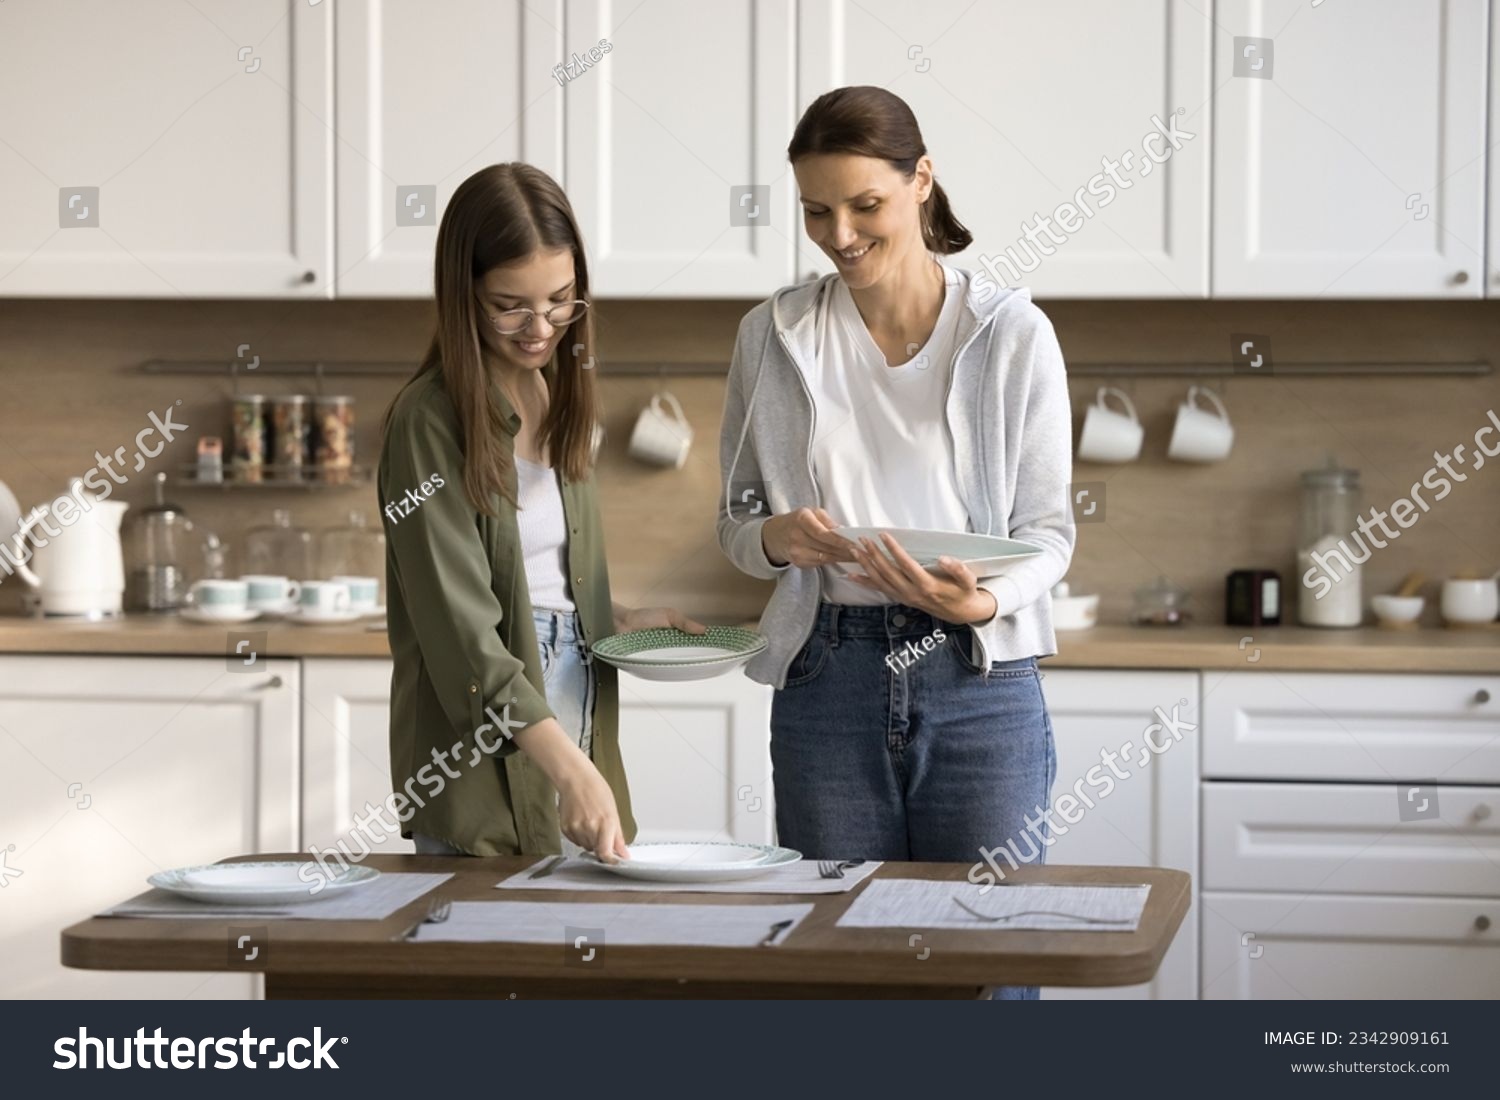 Happy mother and teen daughter child decorating table for dinner, placing dich, plates, talking, chatting, smiling, laughing, enjoying household activities. Kid helping mom with domestic chores #2342909161